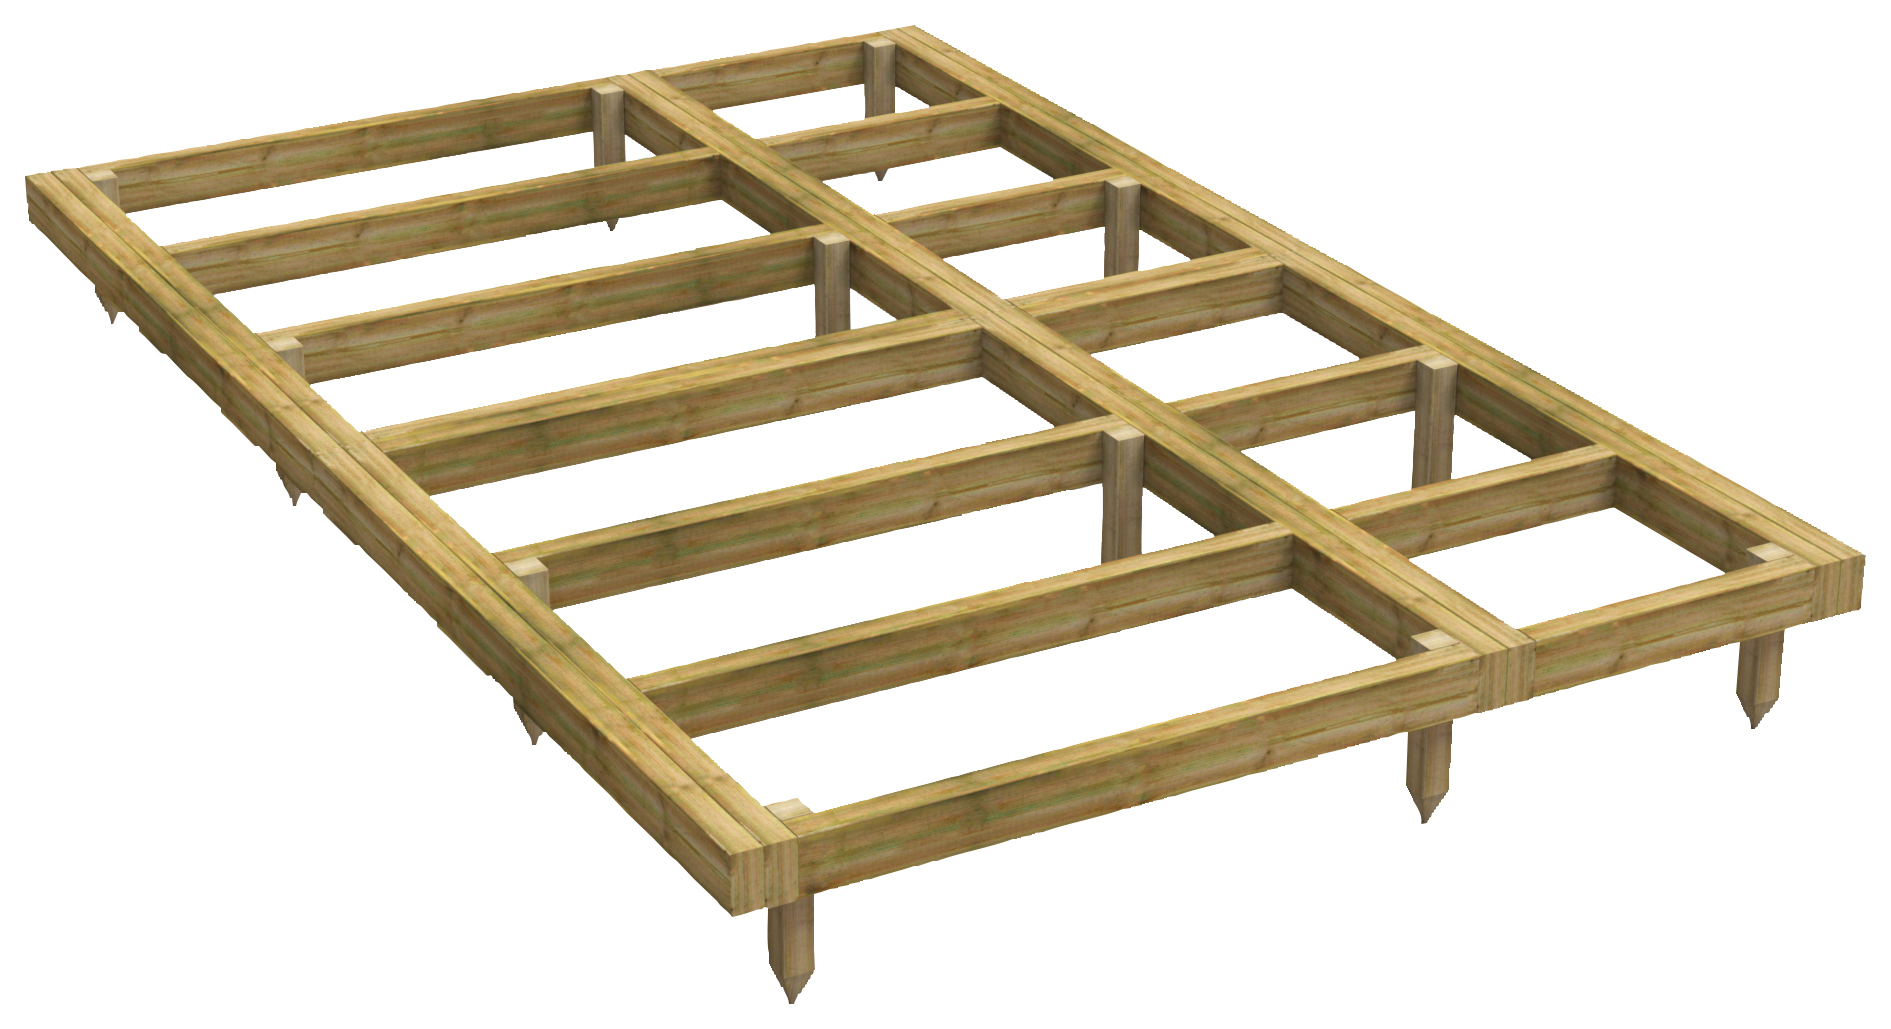 Power Sheds Pressure Treated Garden Building Base Kit - 8 x 10ft